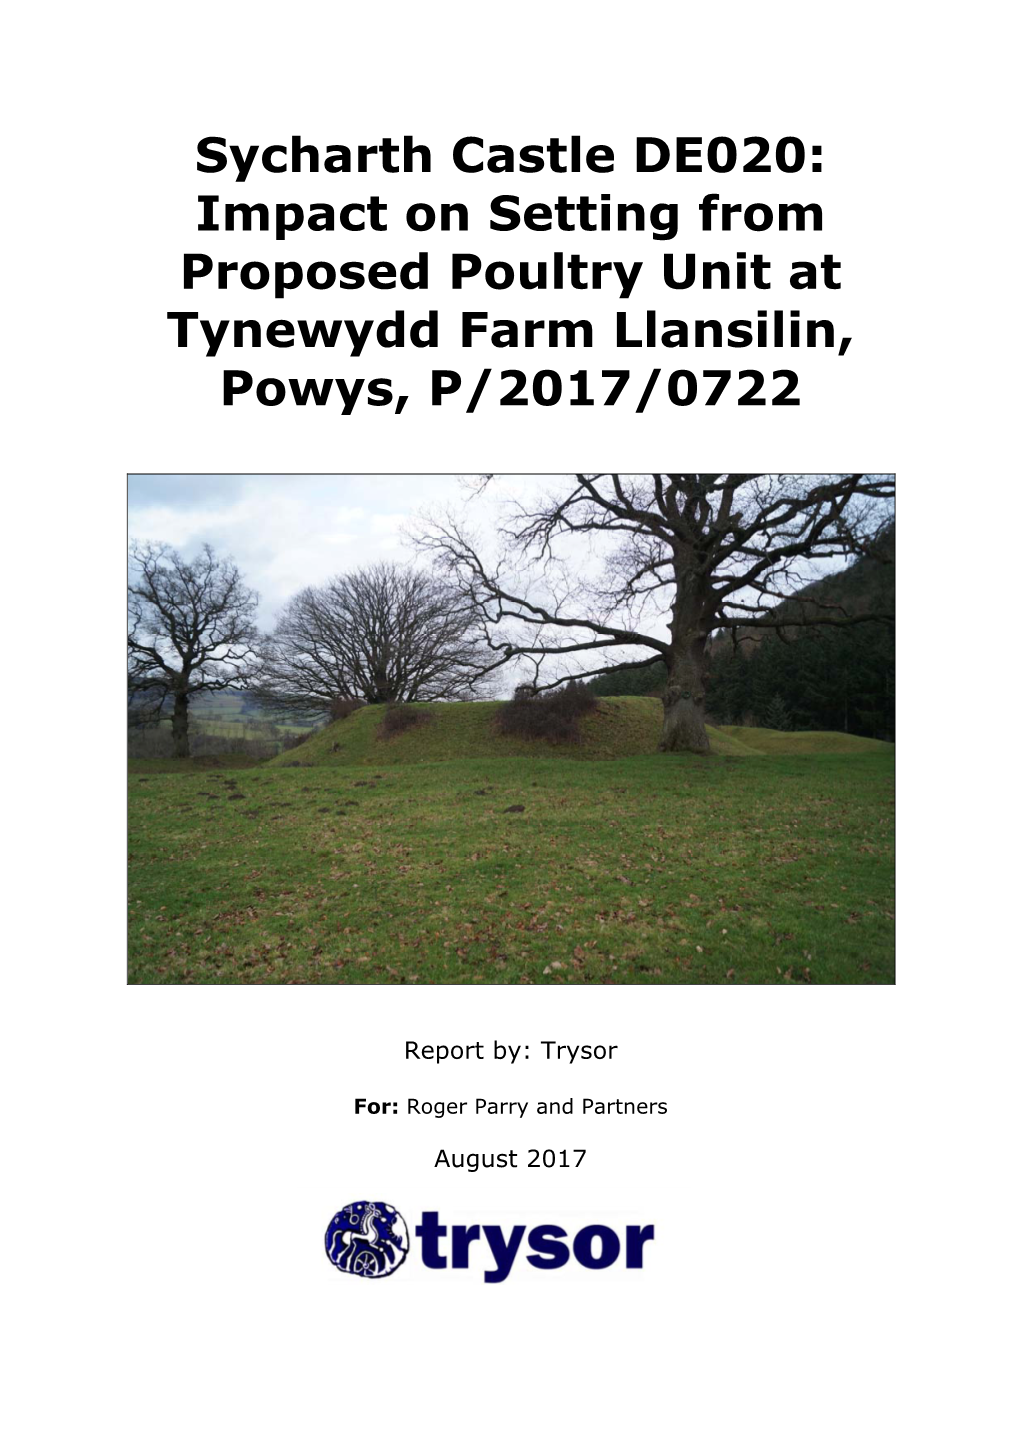 Sycharth Castle DE020: Impact on Setting from Proposed Poultry Unit at Tynewydd Farm Llansilin, Powys, P/2017/0722